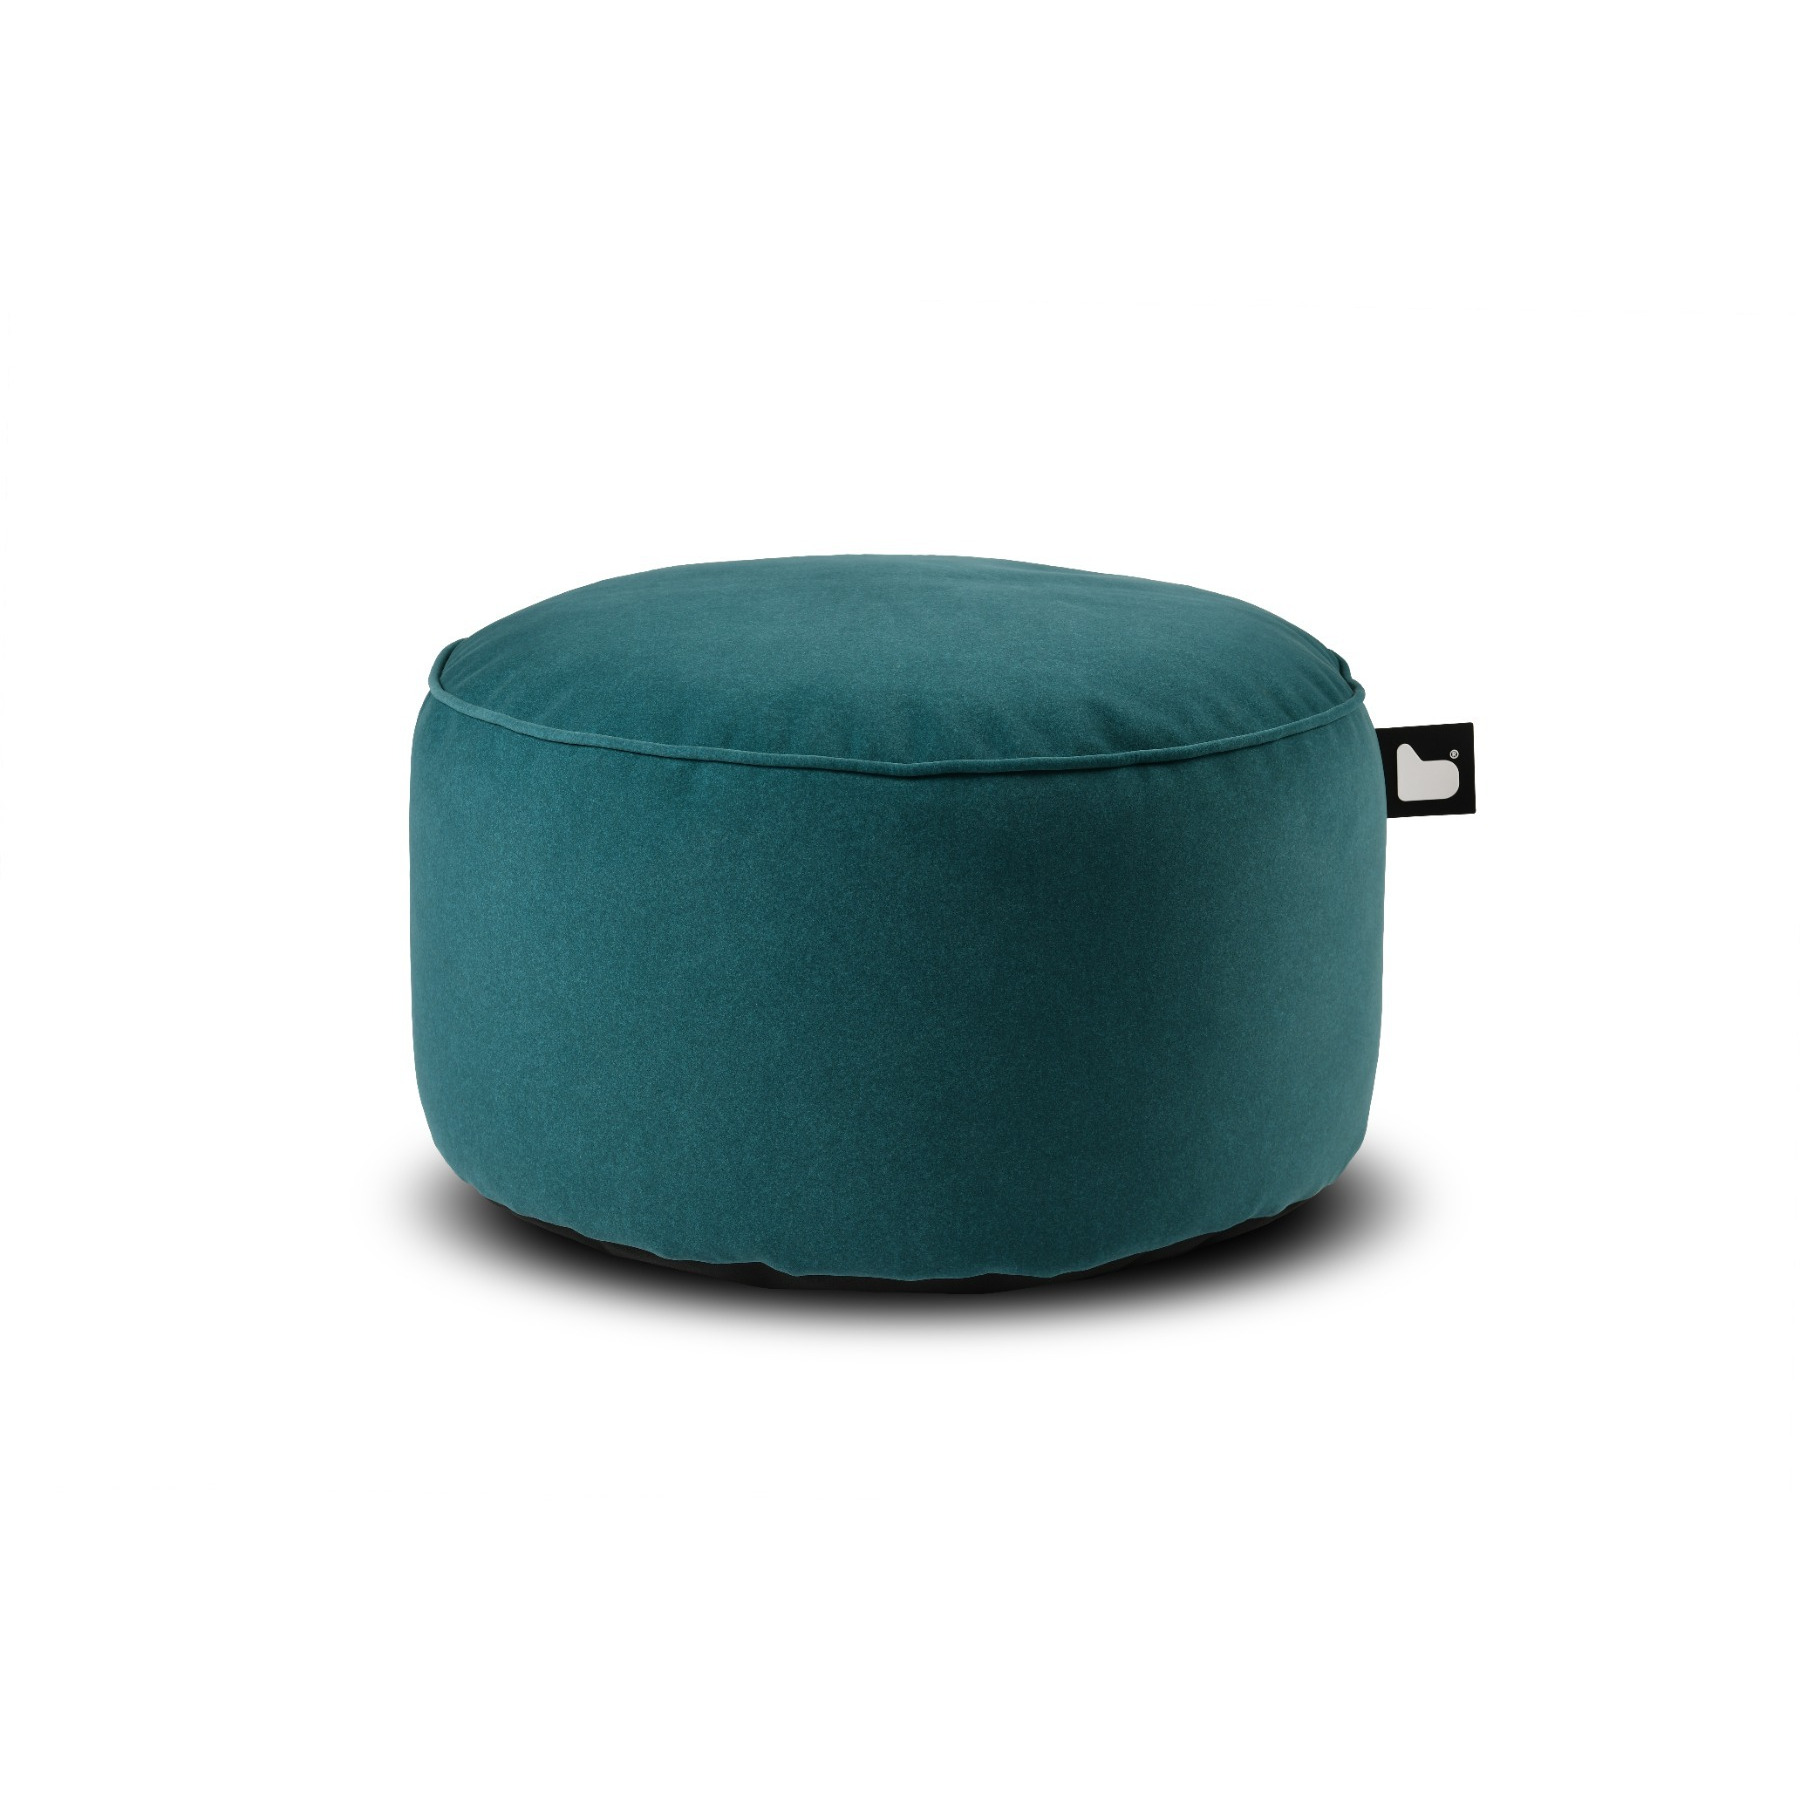 Extreme Lounging B Pouffe Brushed Suede Teal - image 1